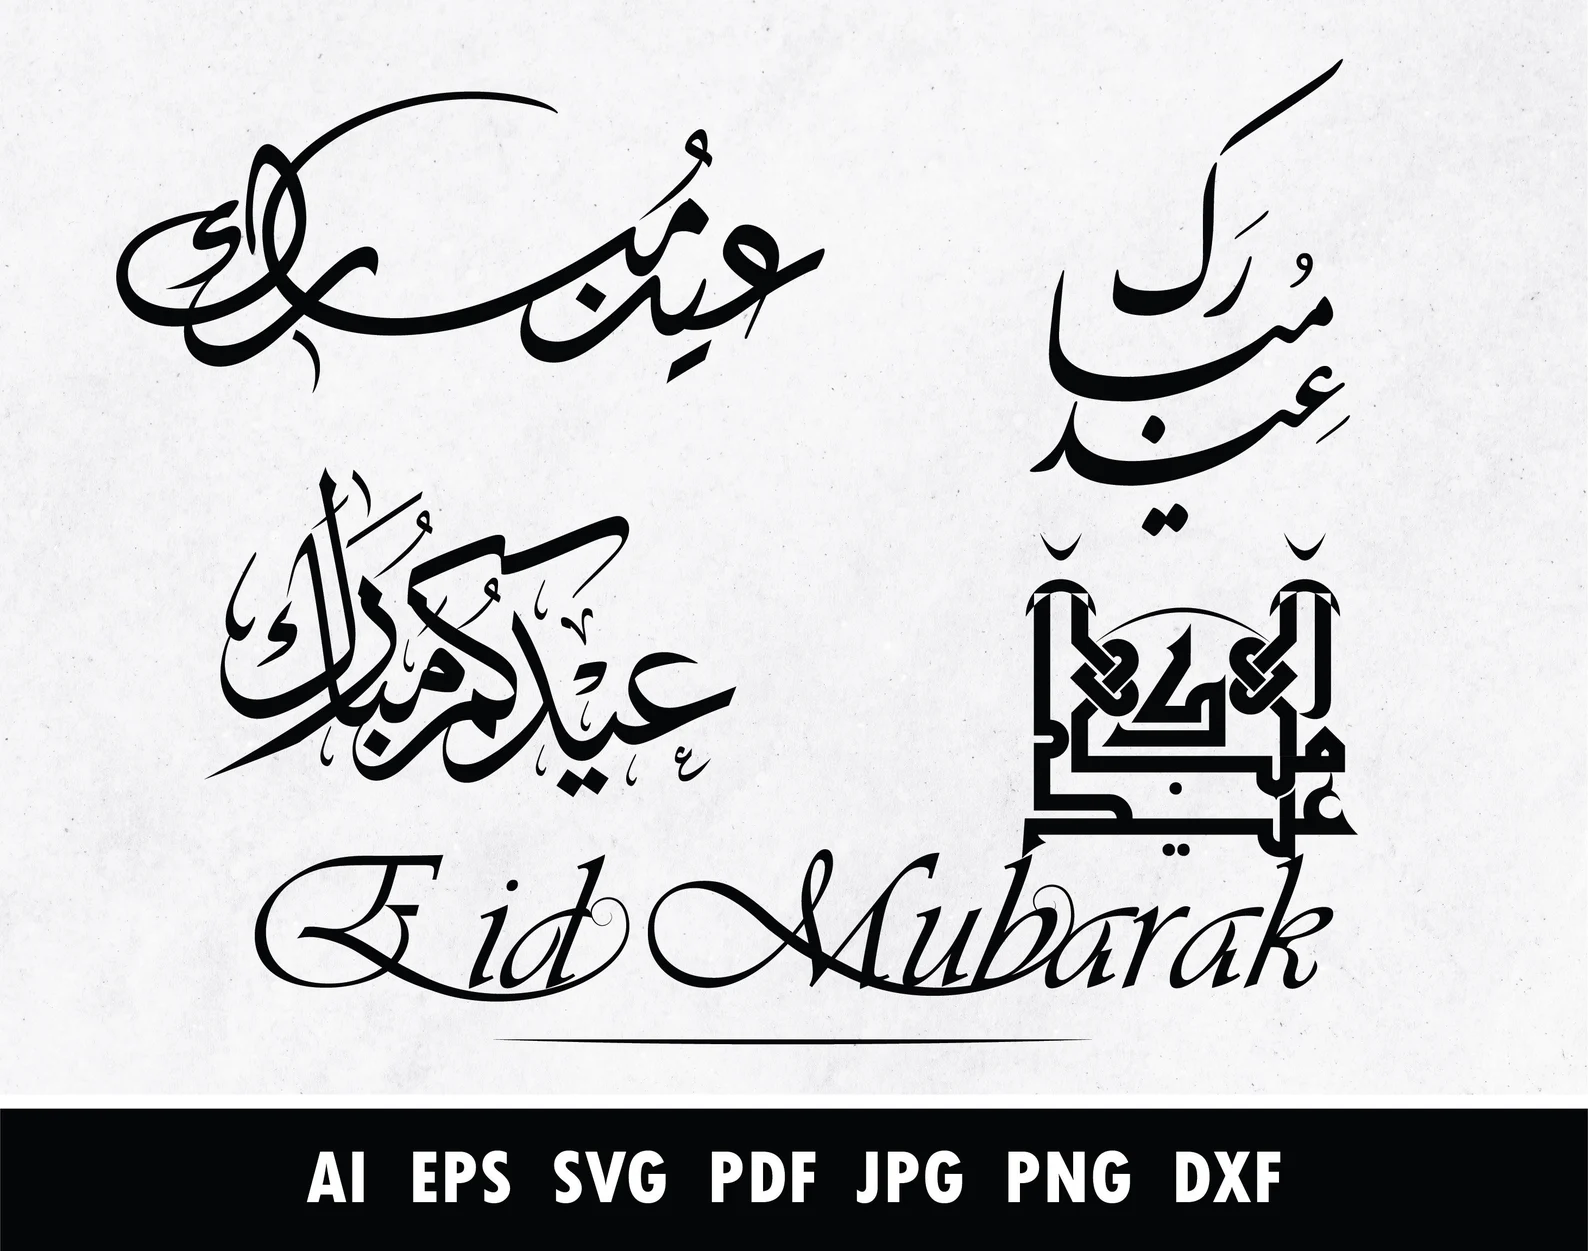 Delicate thin line for phrases and illustration in an islamic style.